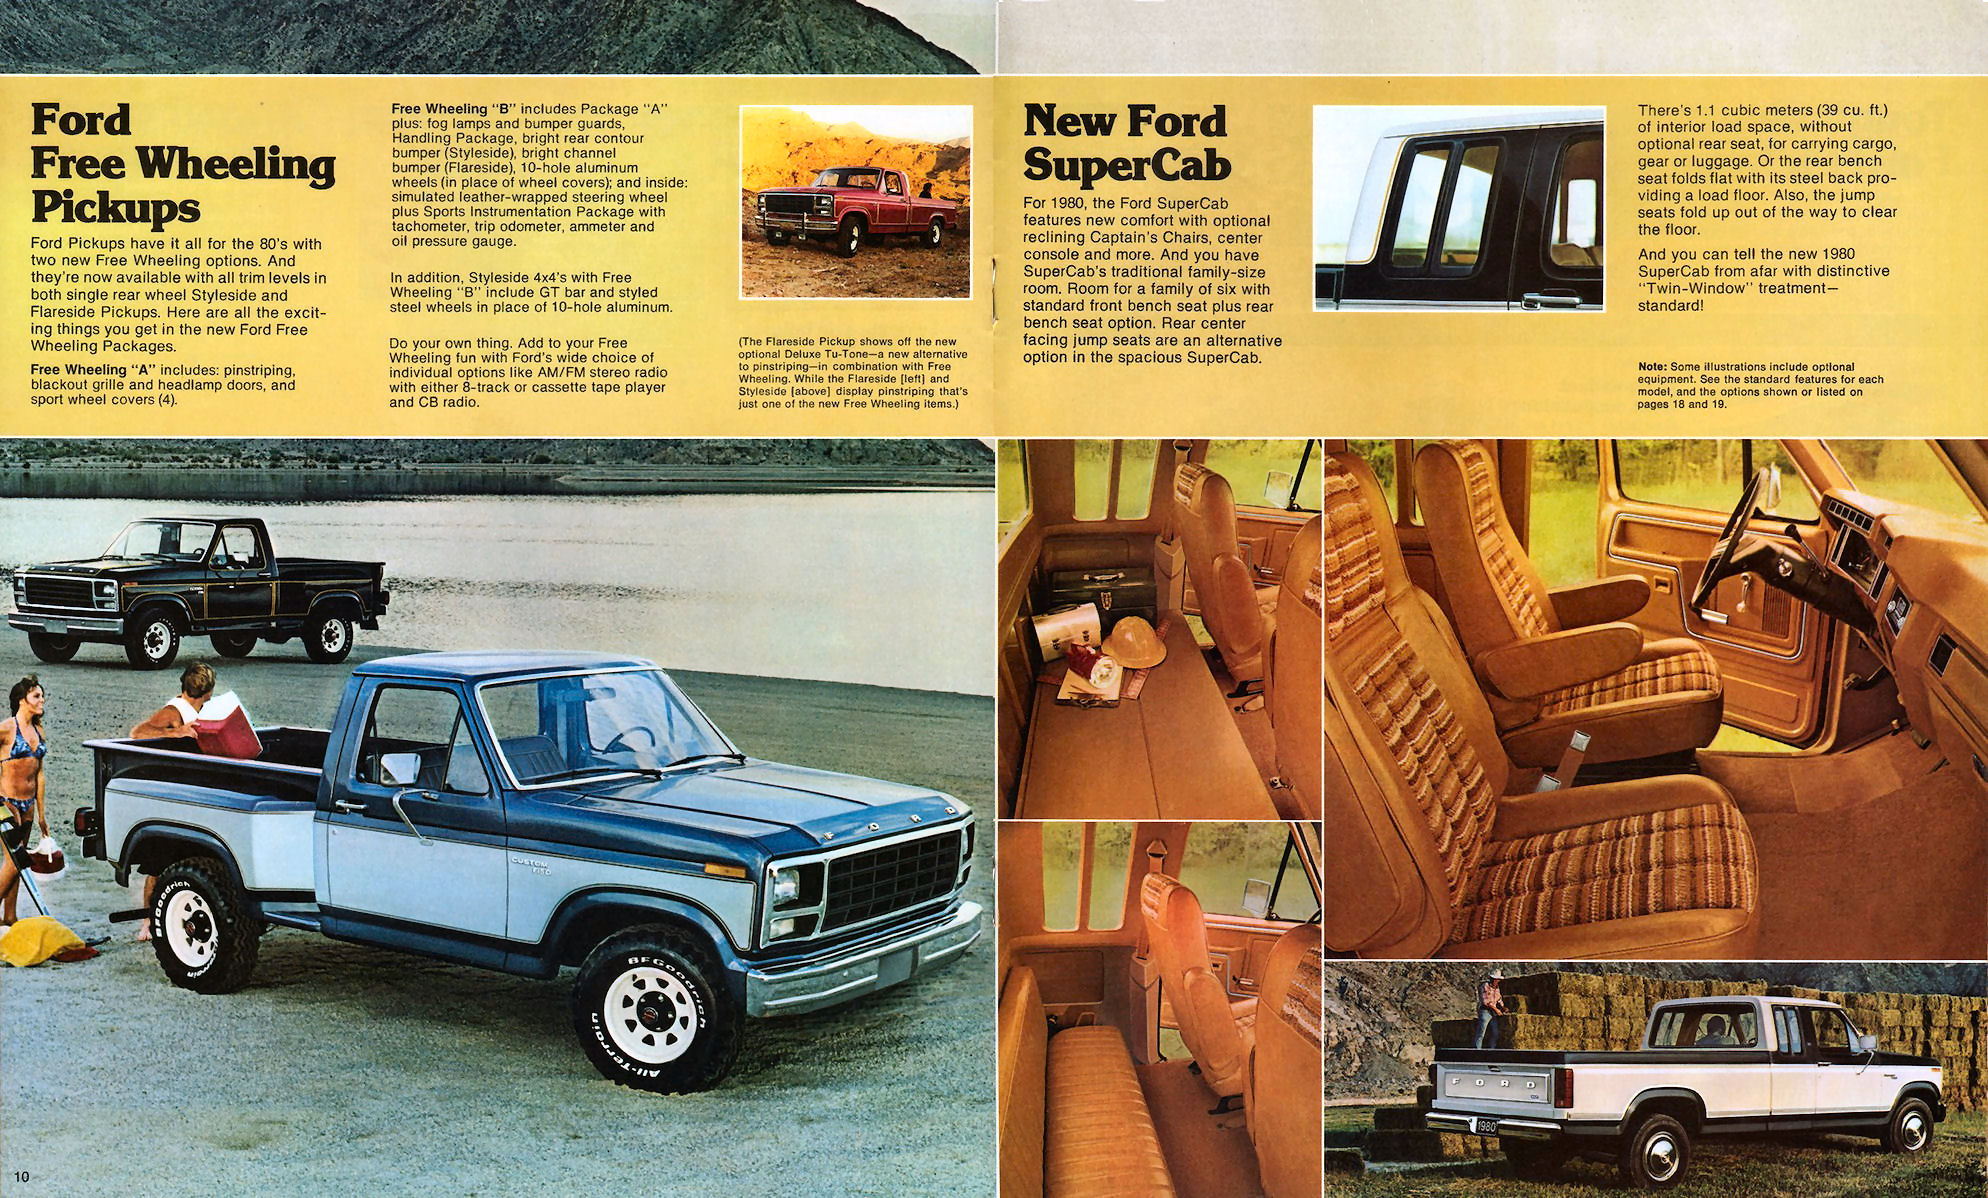 1980_Ford_Pickup-10-11